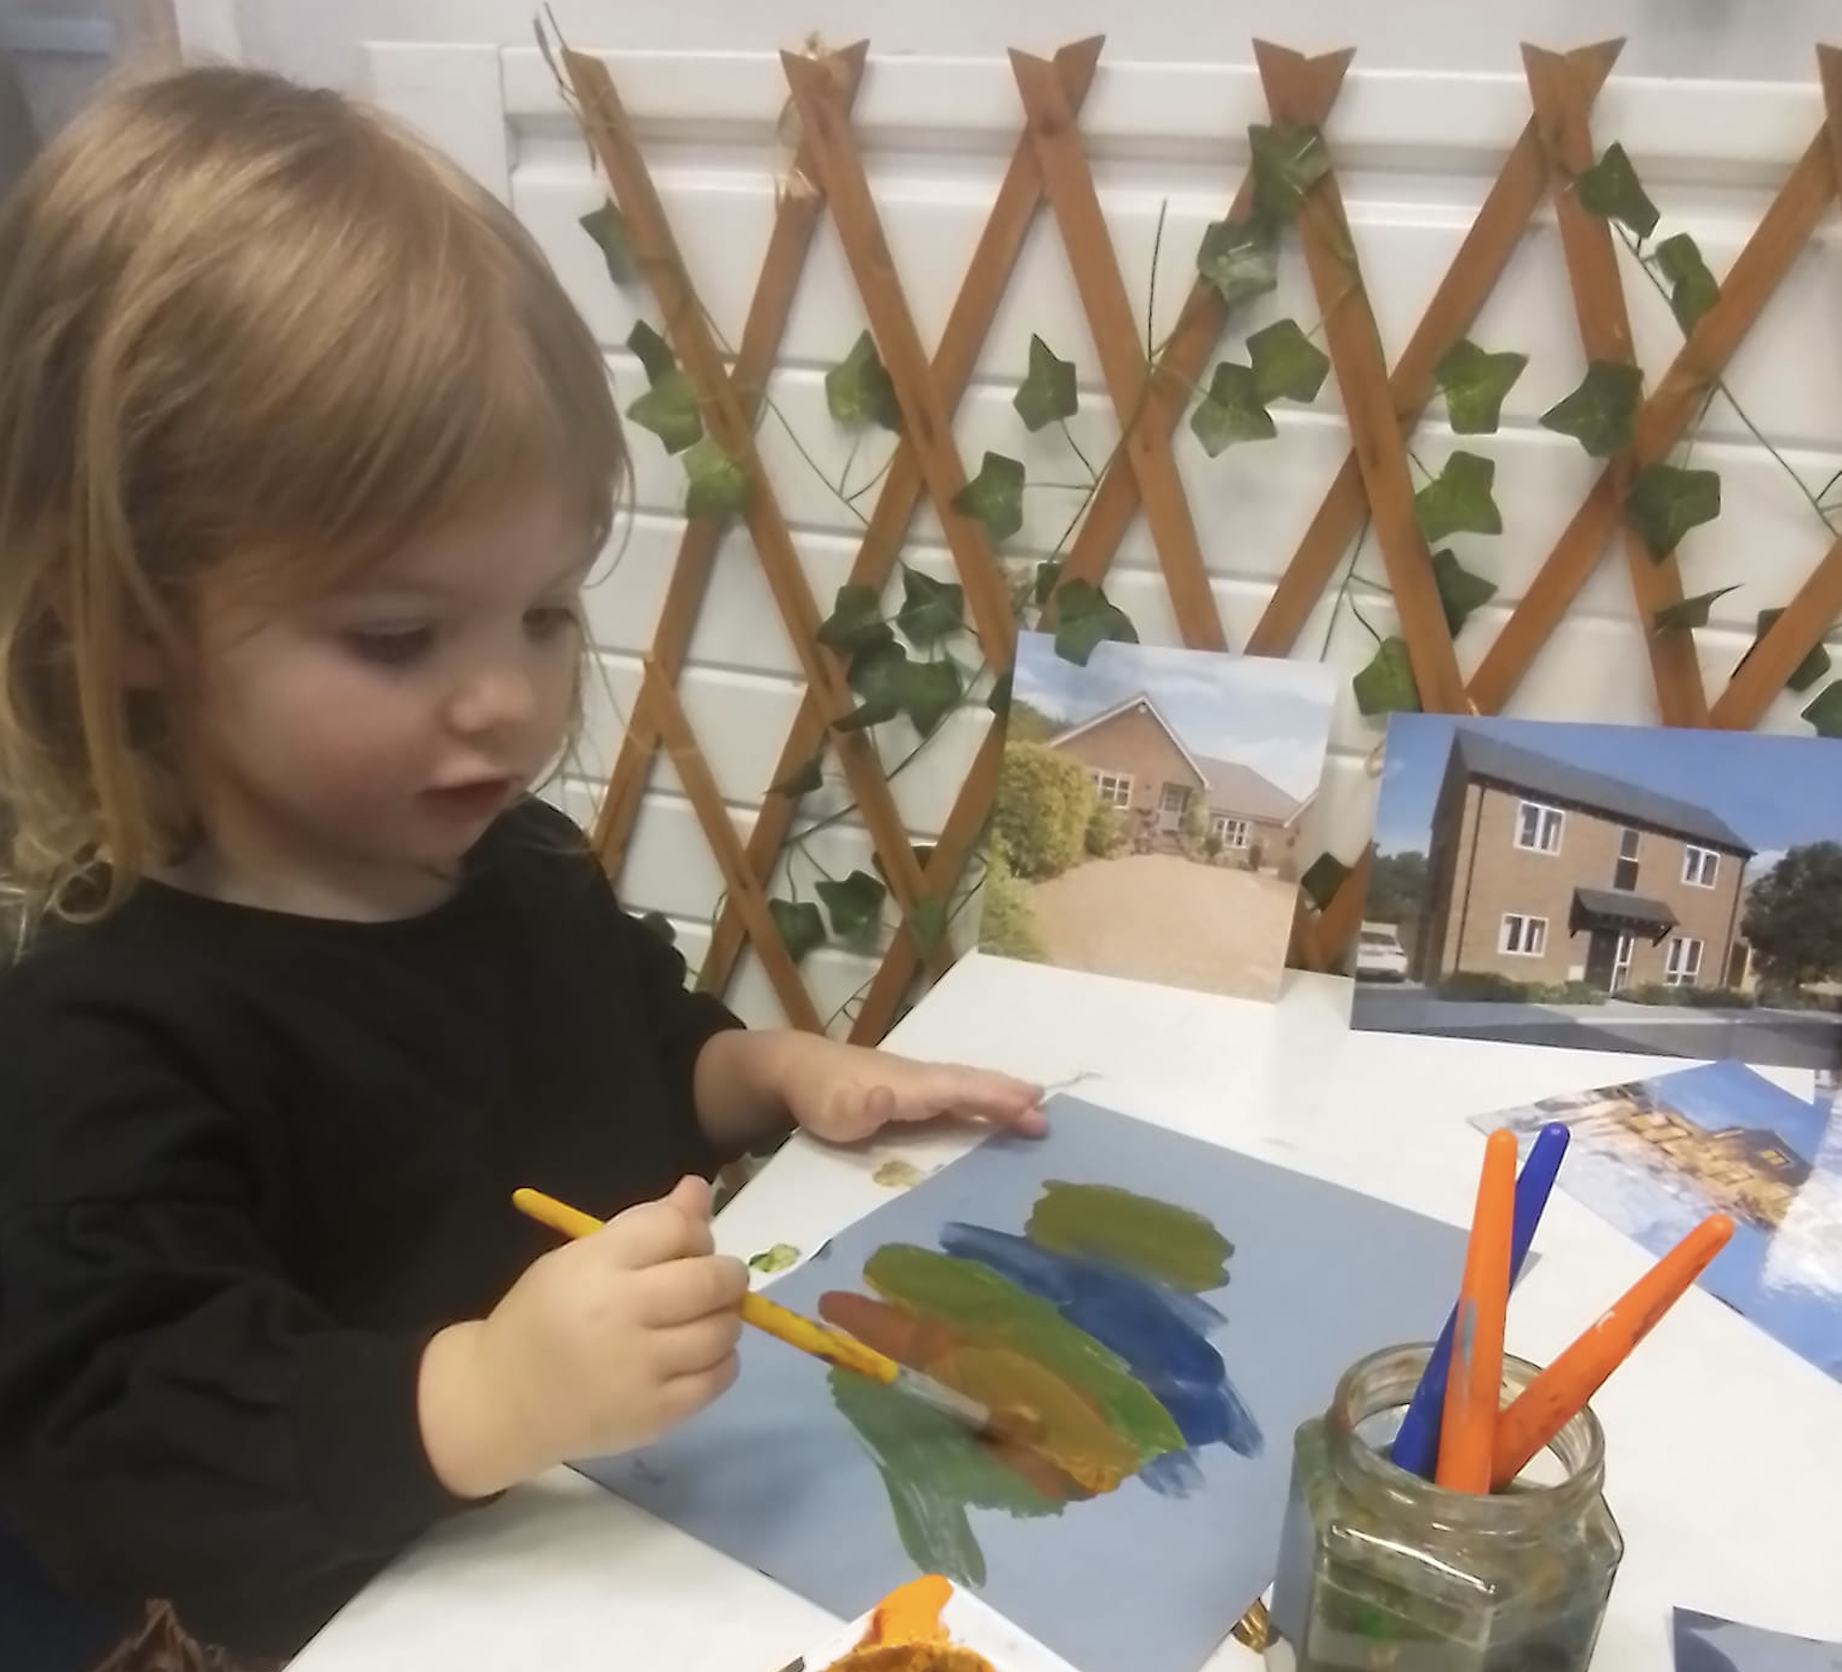 PICTURE GALLERY - Lots of creative fun at nursery